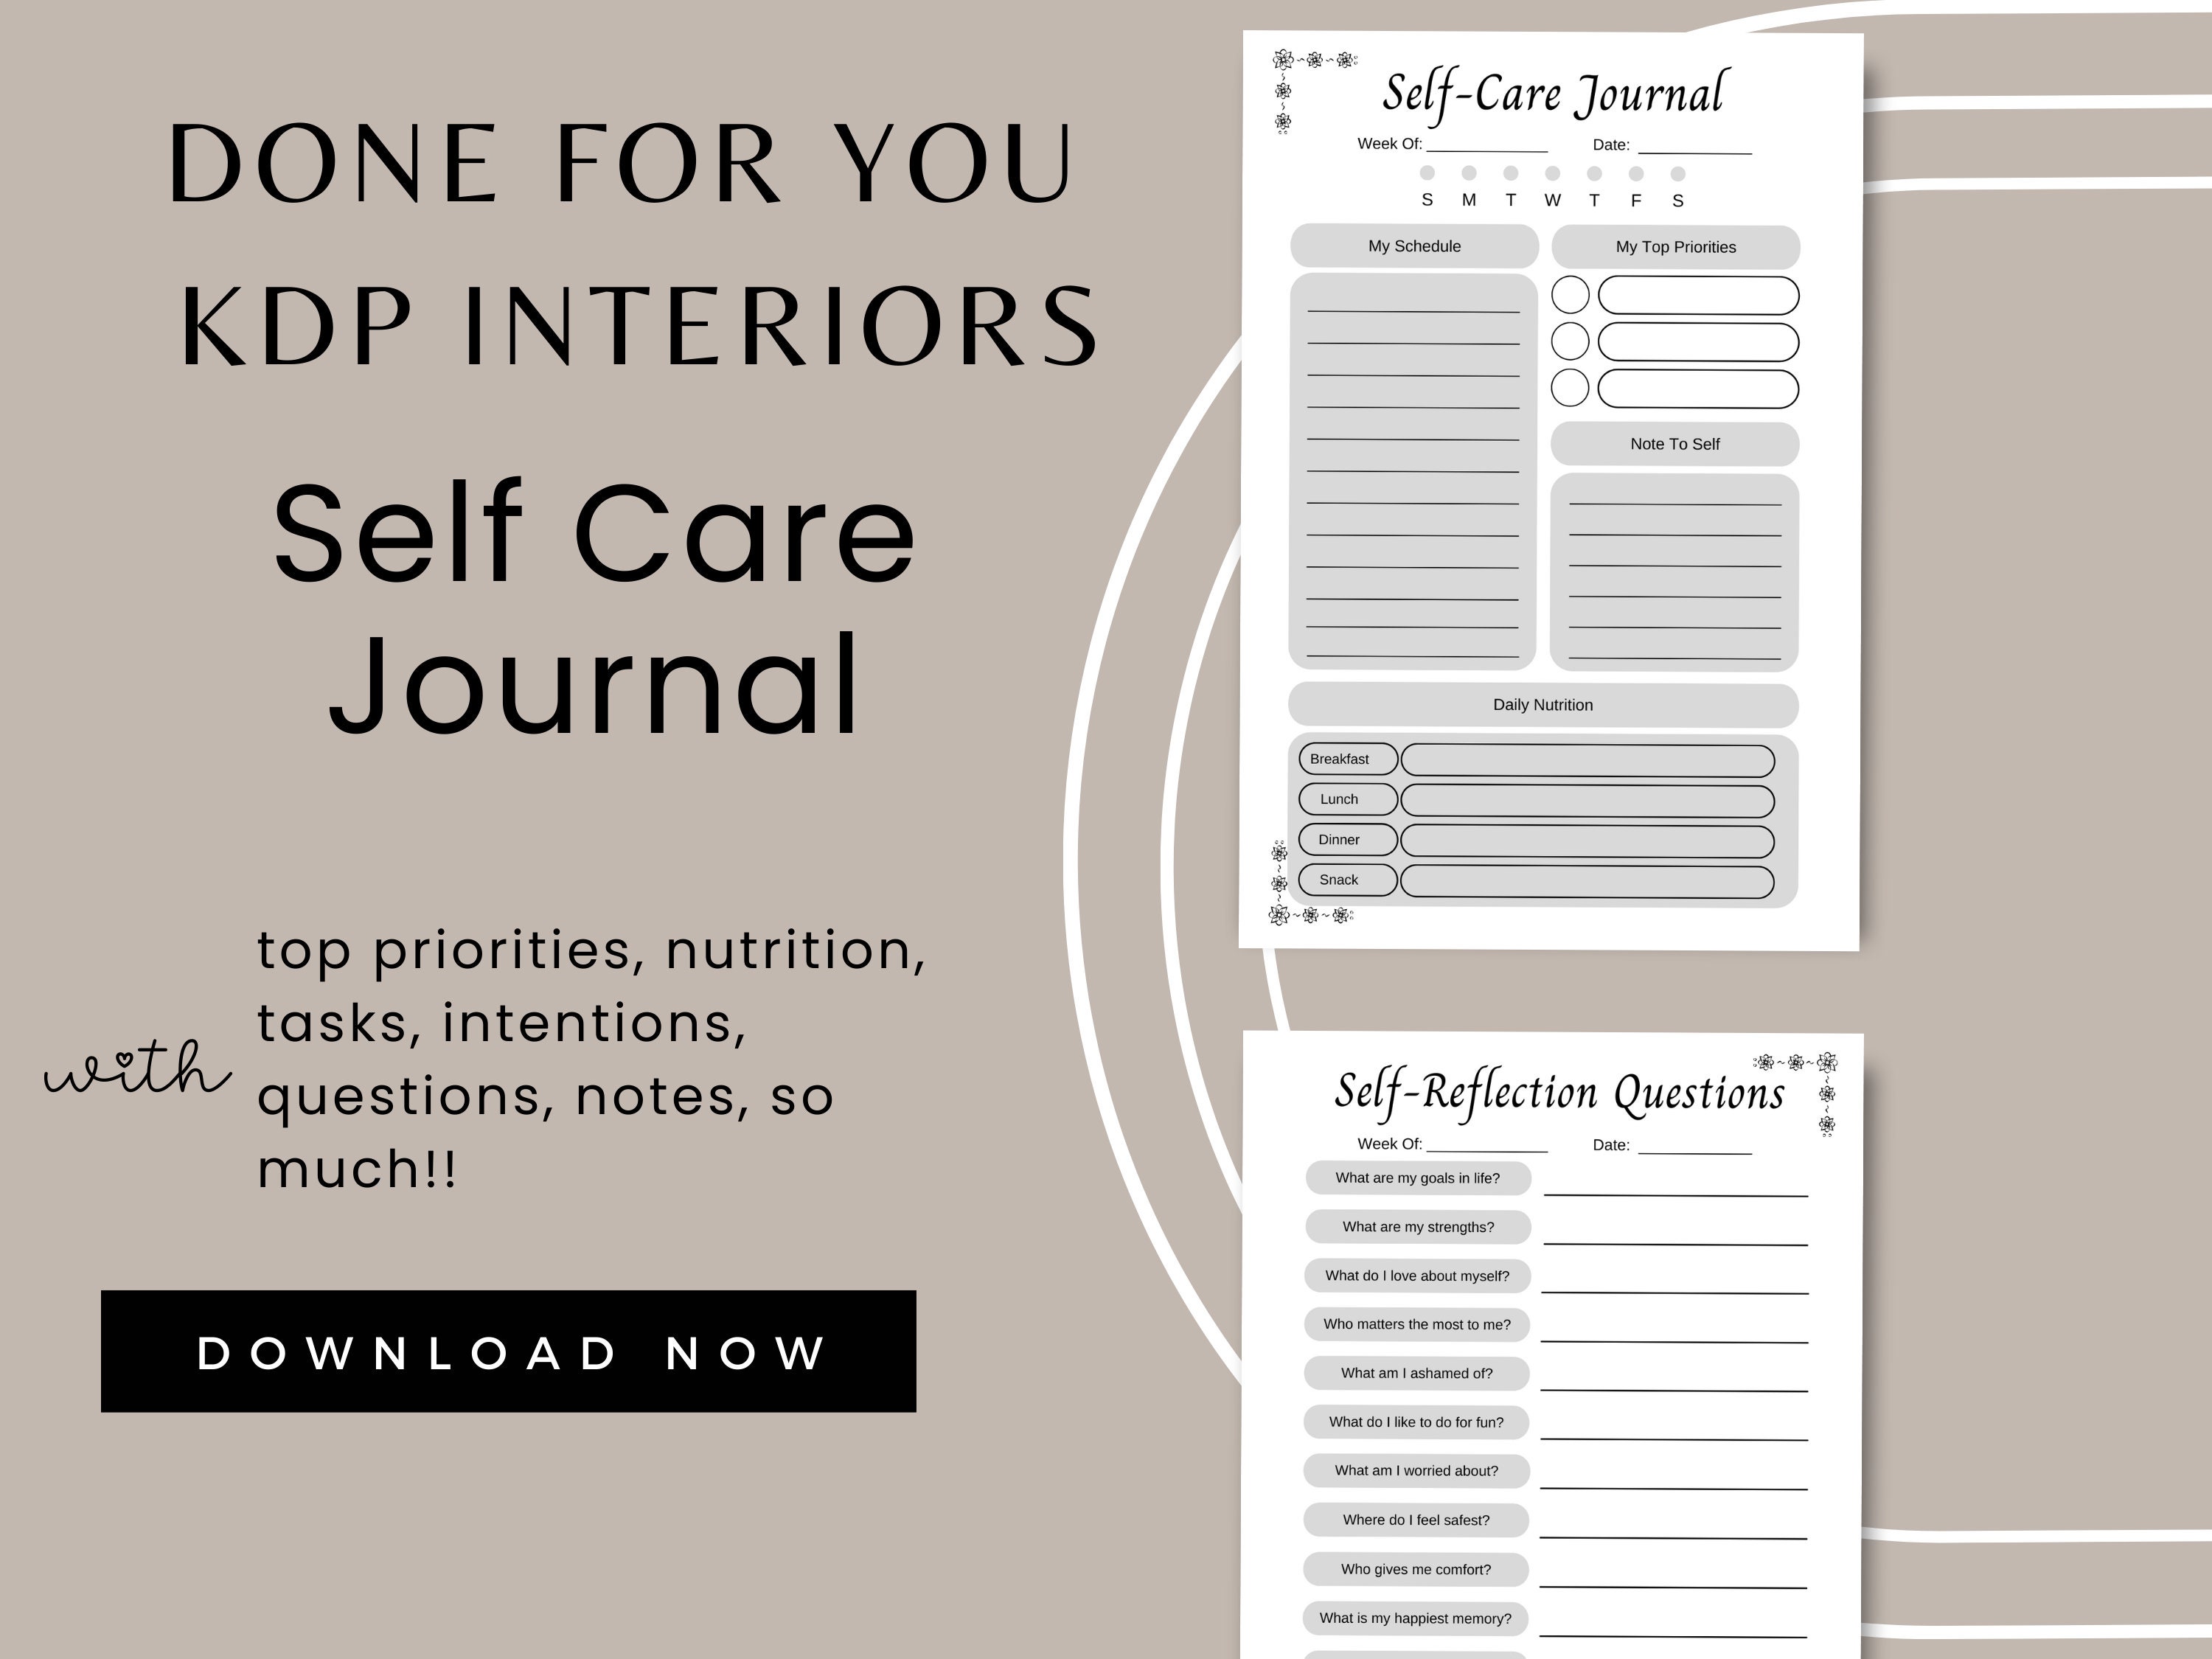 Bullet Journal Templates you can use for Paperbacks and Printables ⋆  Publish Low Content Books